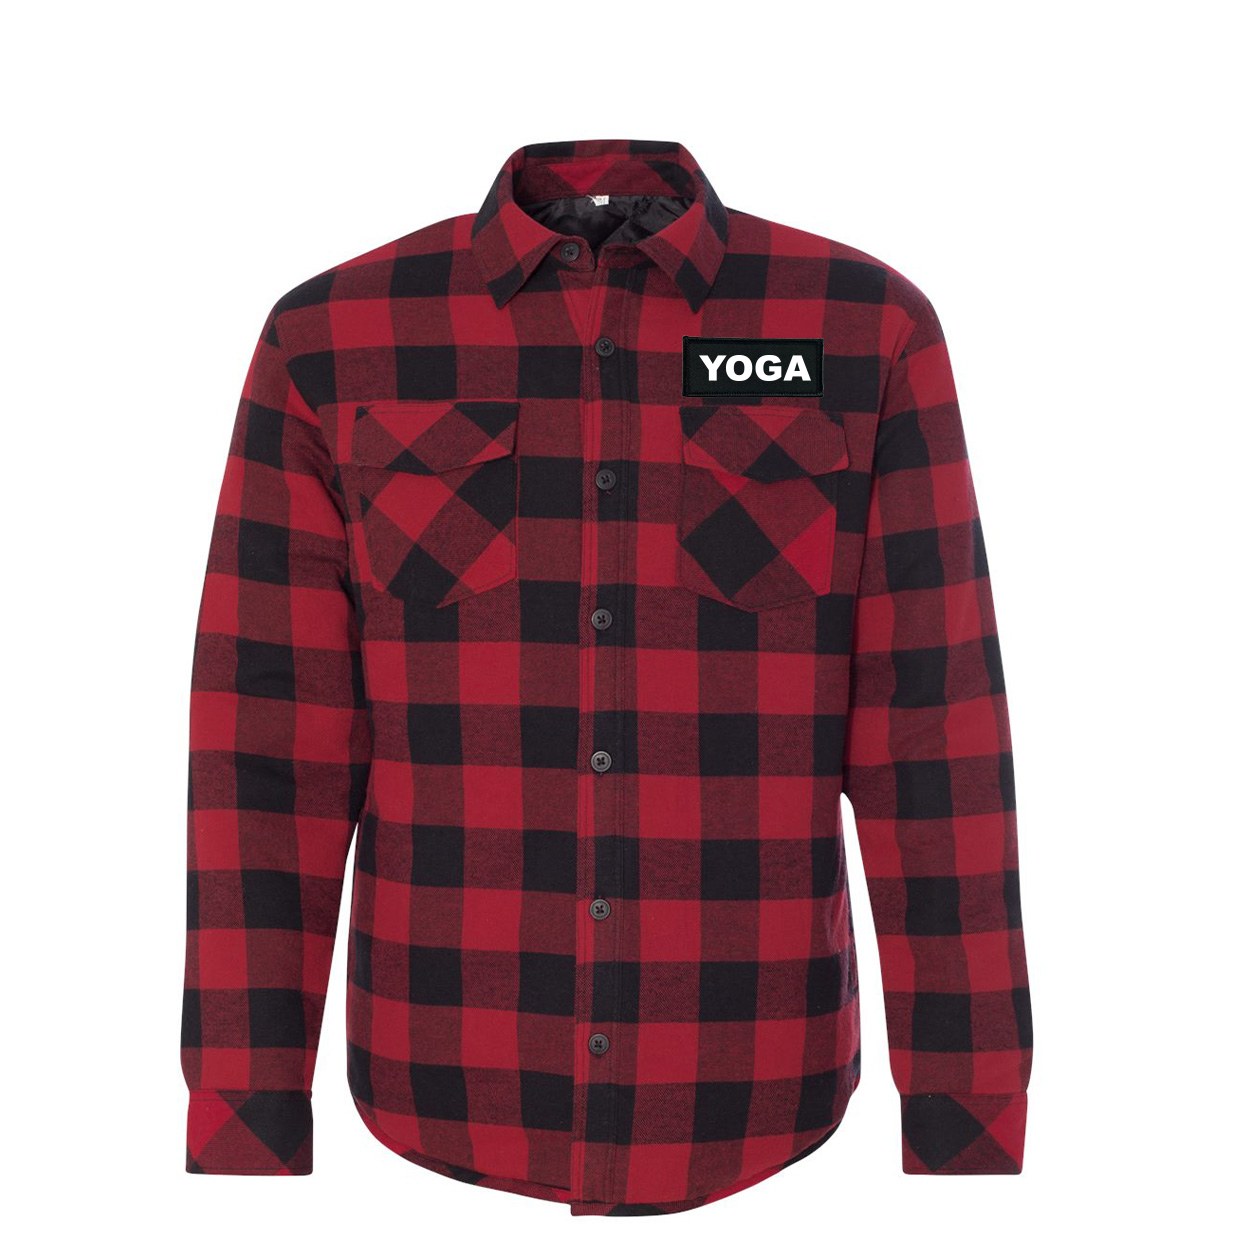 Yoga Brand Logo Classic Unisex Woven Patch Quilted Button Flannel Jacket Red/Black Buffalo (White Logo)